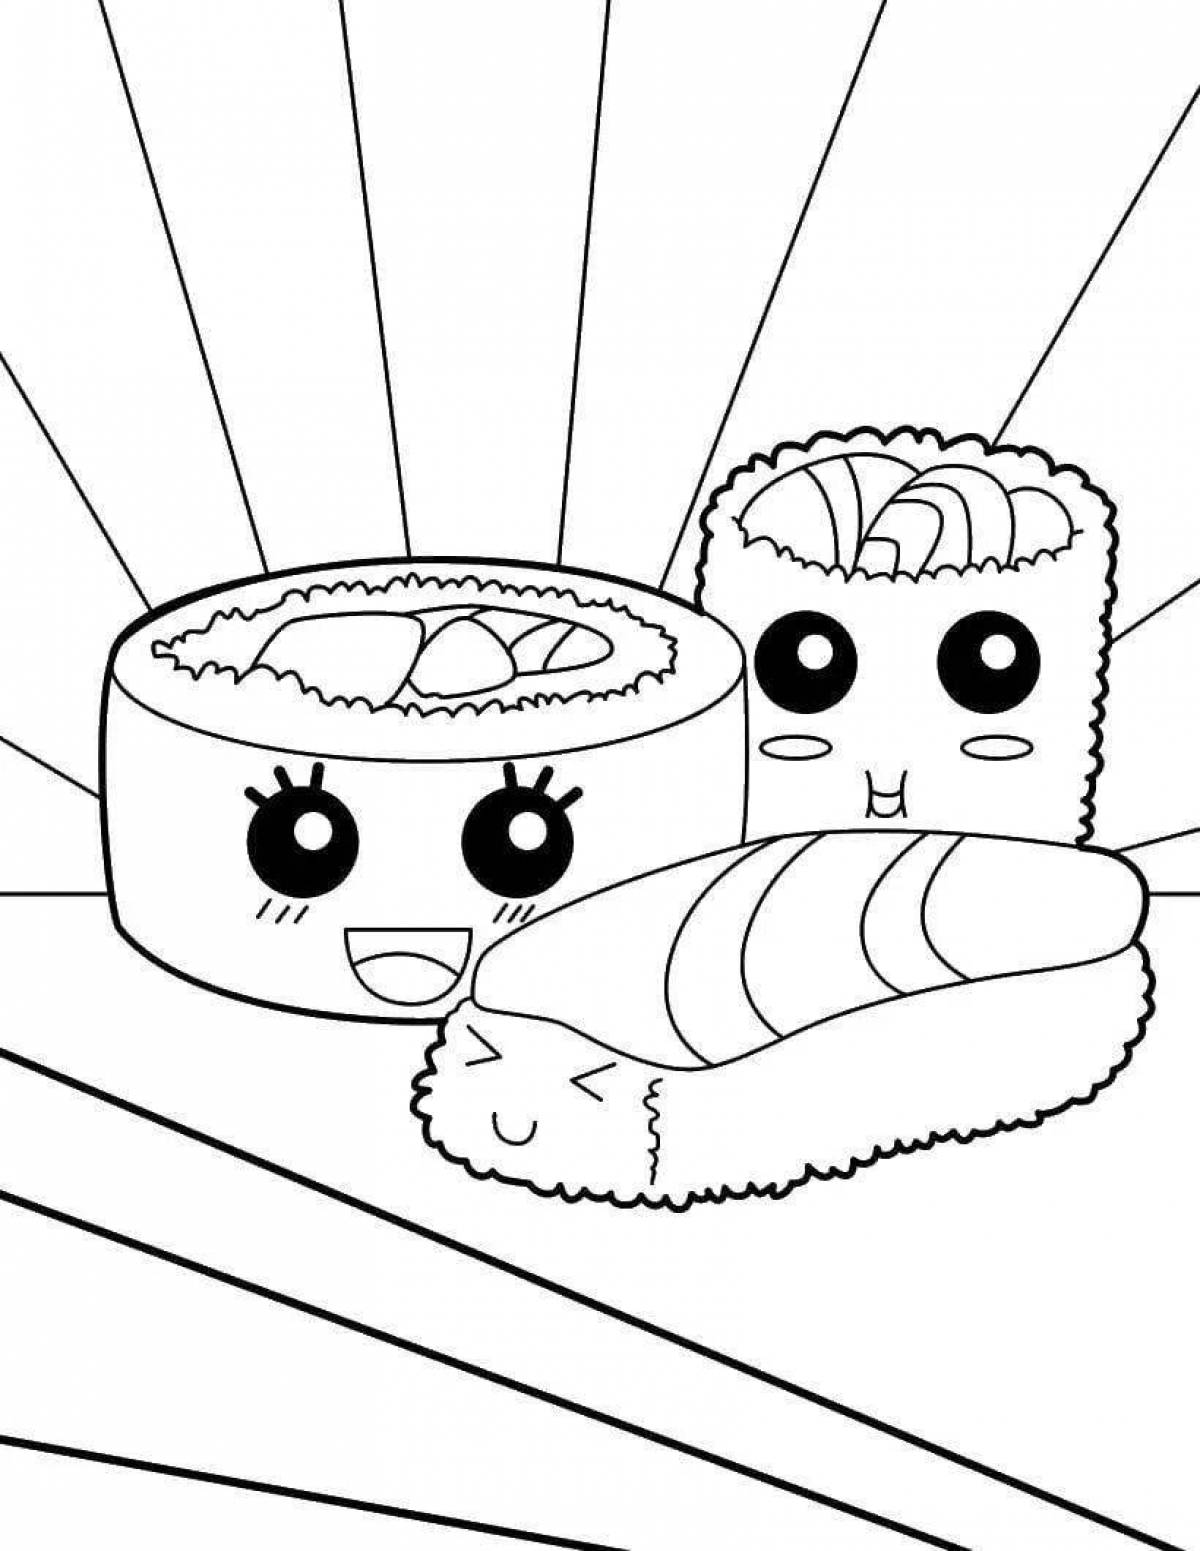 Bold squishy food coloring page